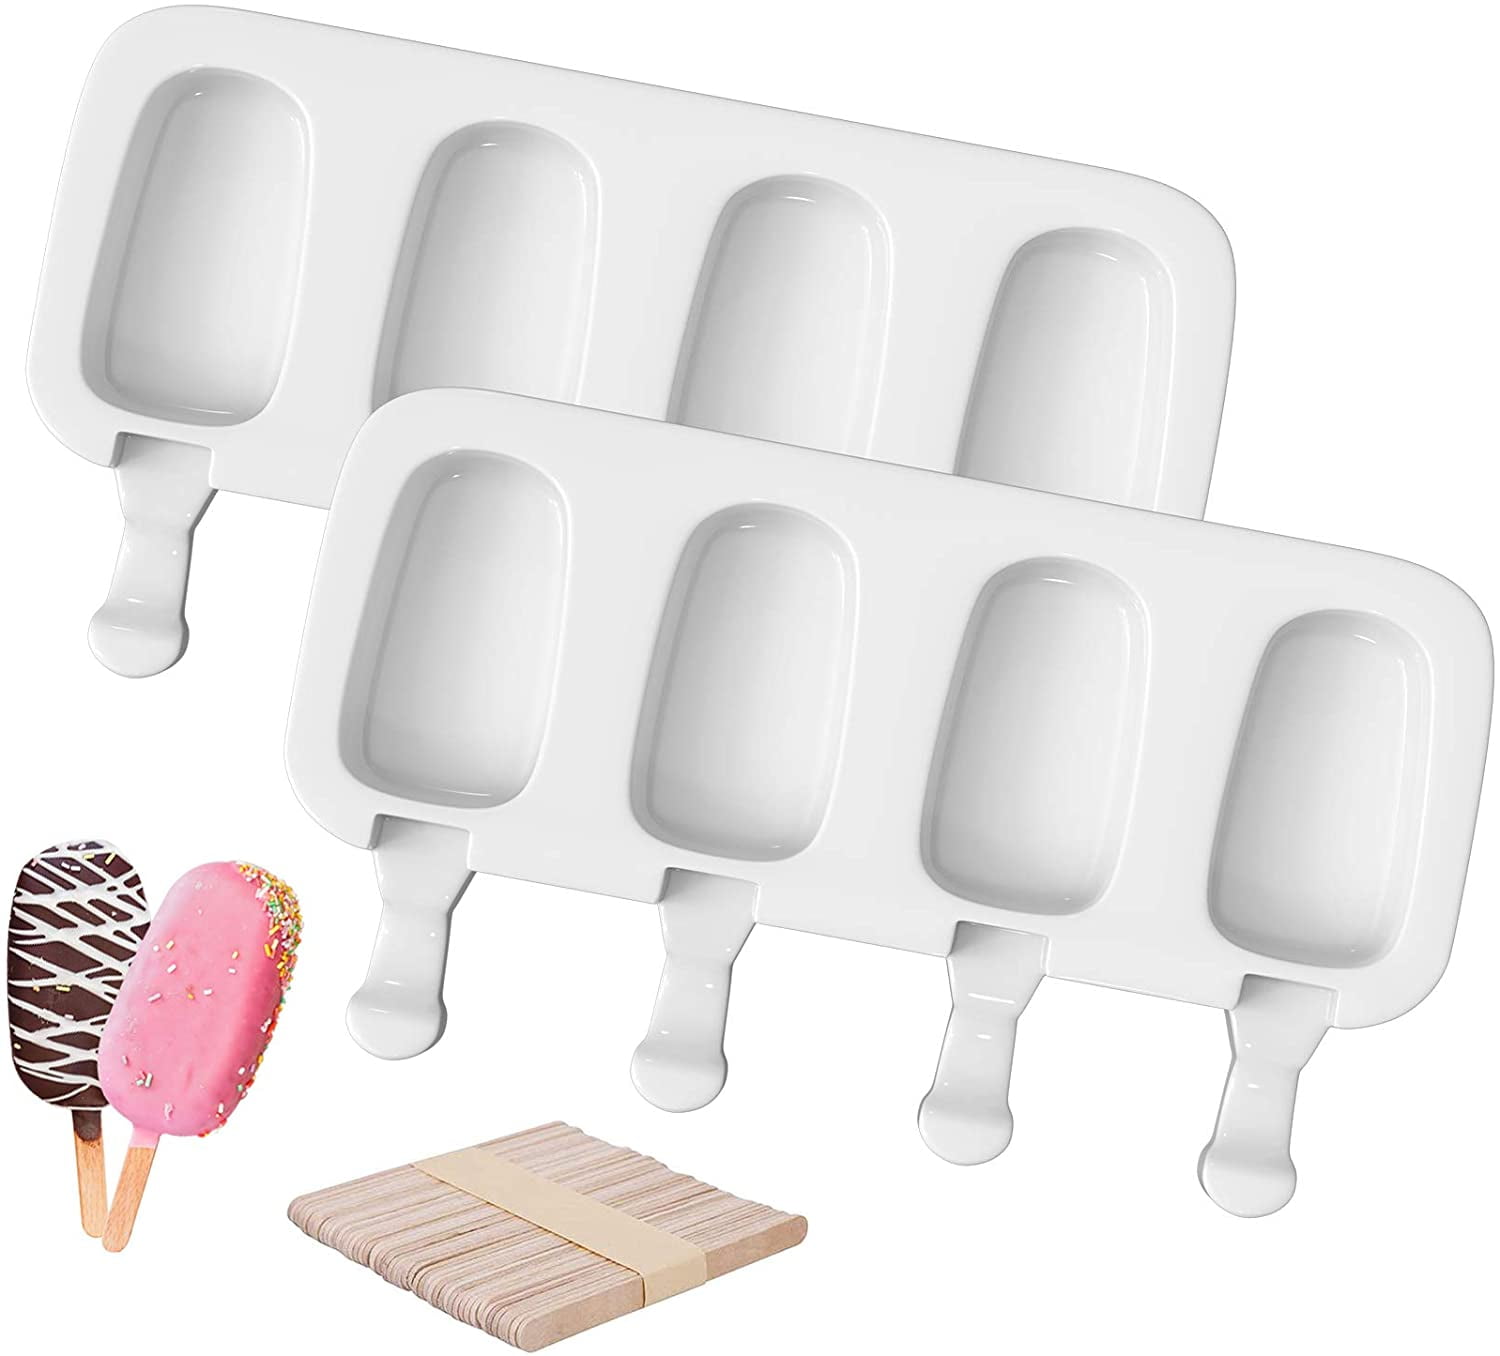 12 Cavities Silicone Popsicle Molds for Kids Adults Food Grade Popsicle  Maker Molds Ice Pop Mold Hom - ASM040 - IdeaStage Promotional Products